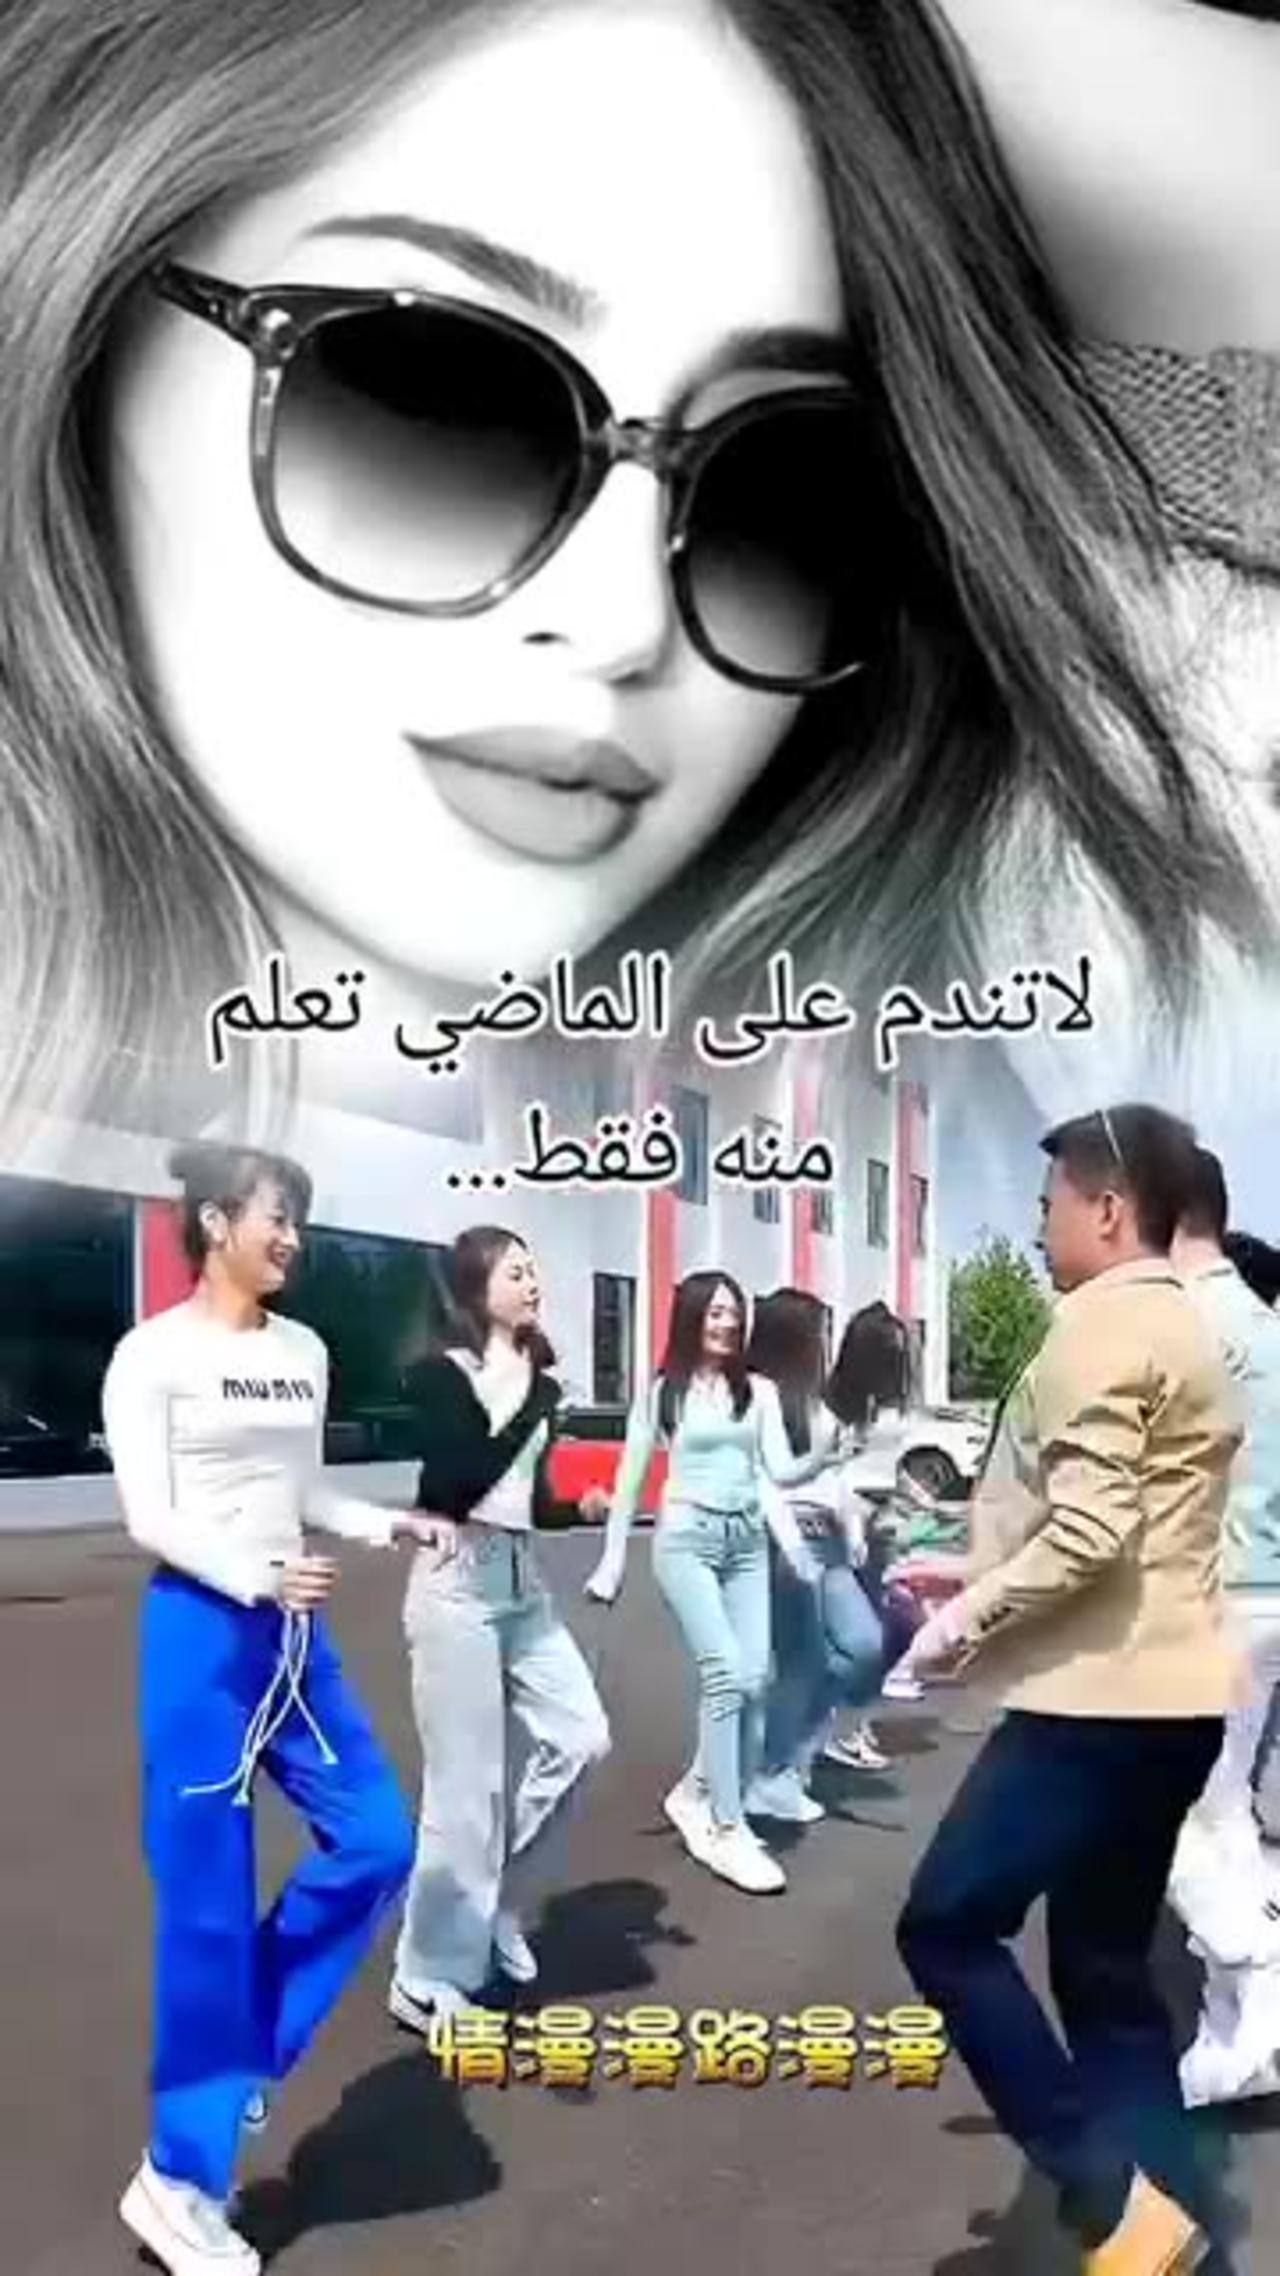 youthful chinese youths dancing to the sound of egyptian music